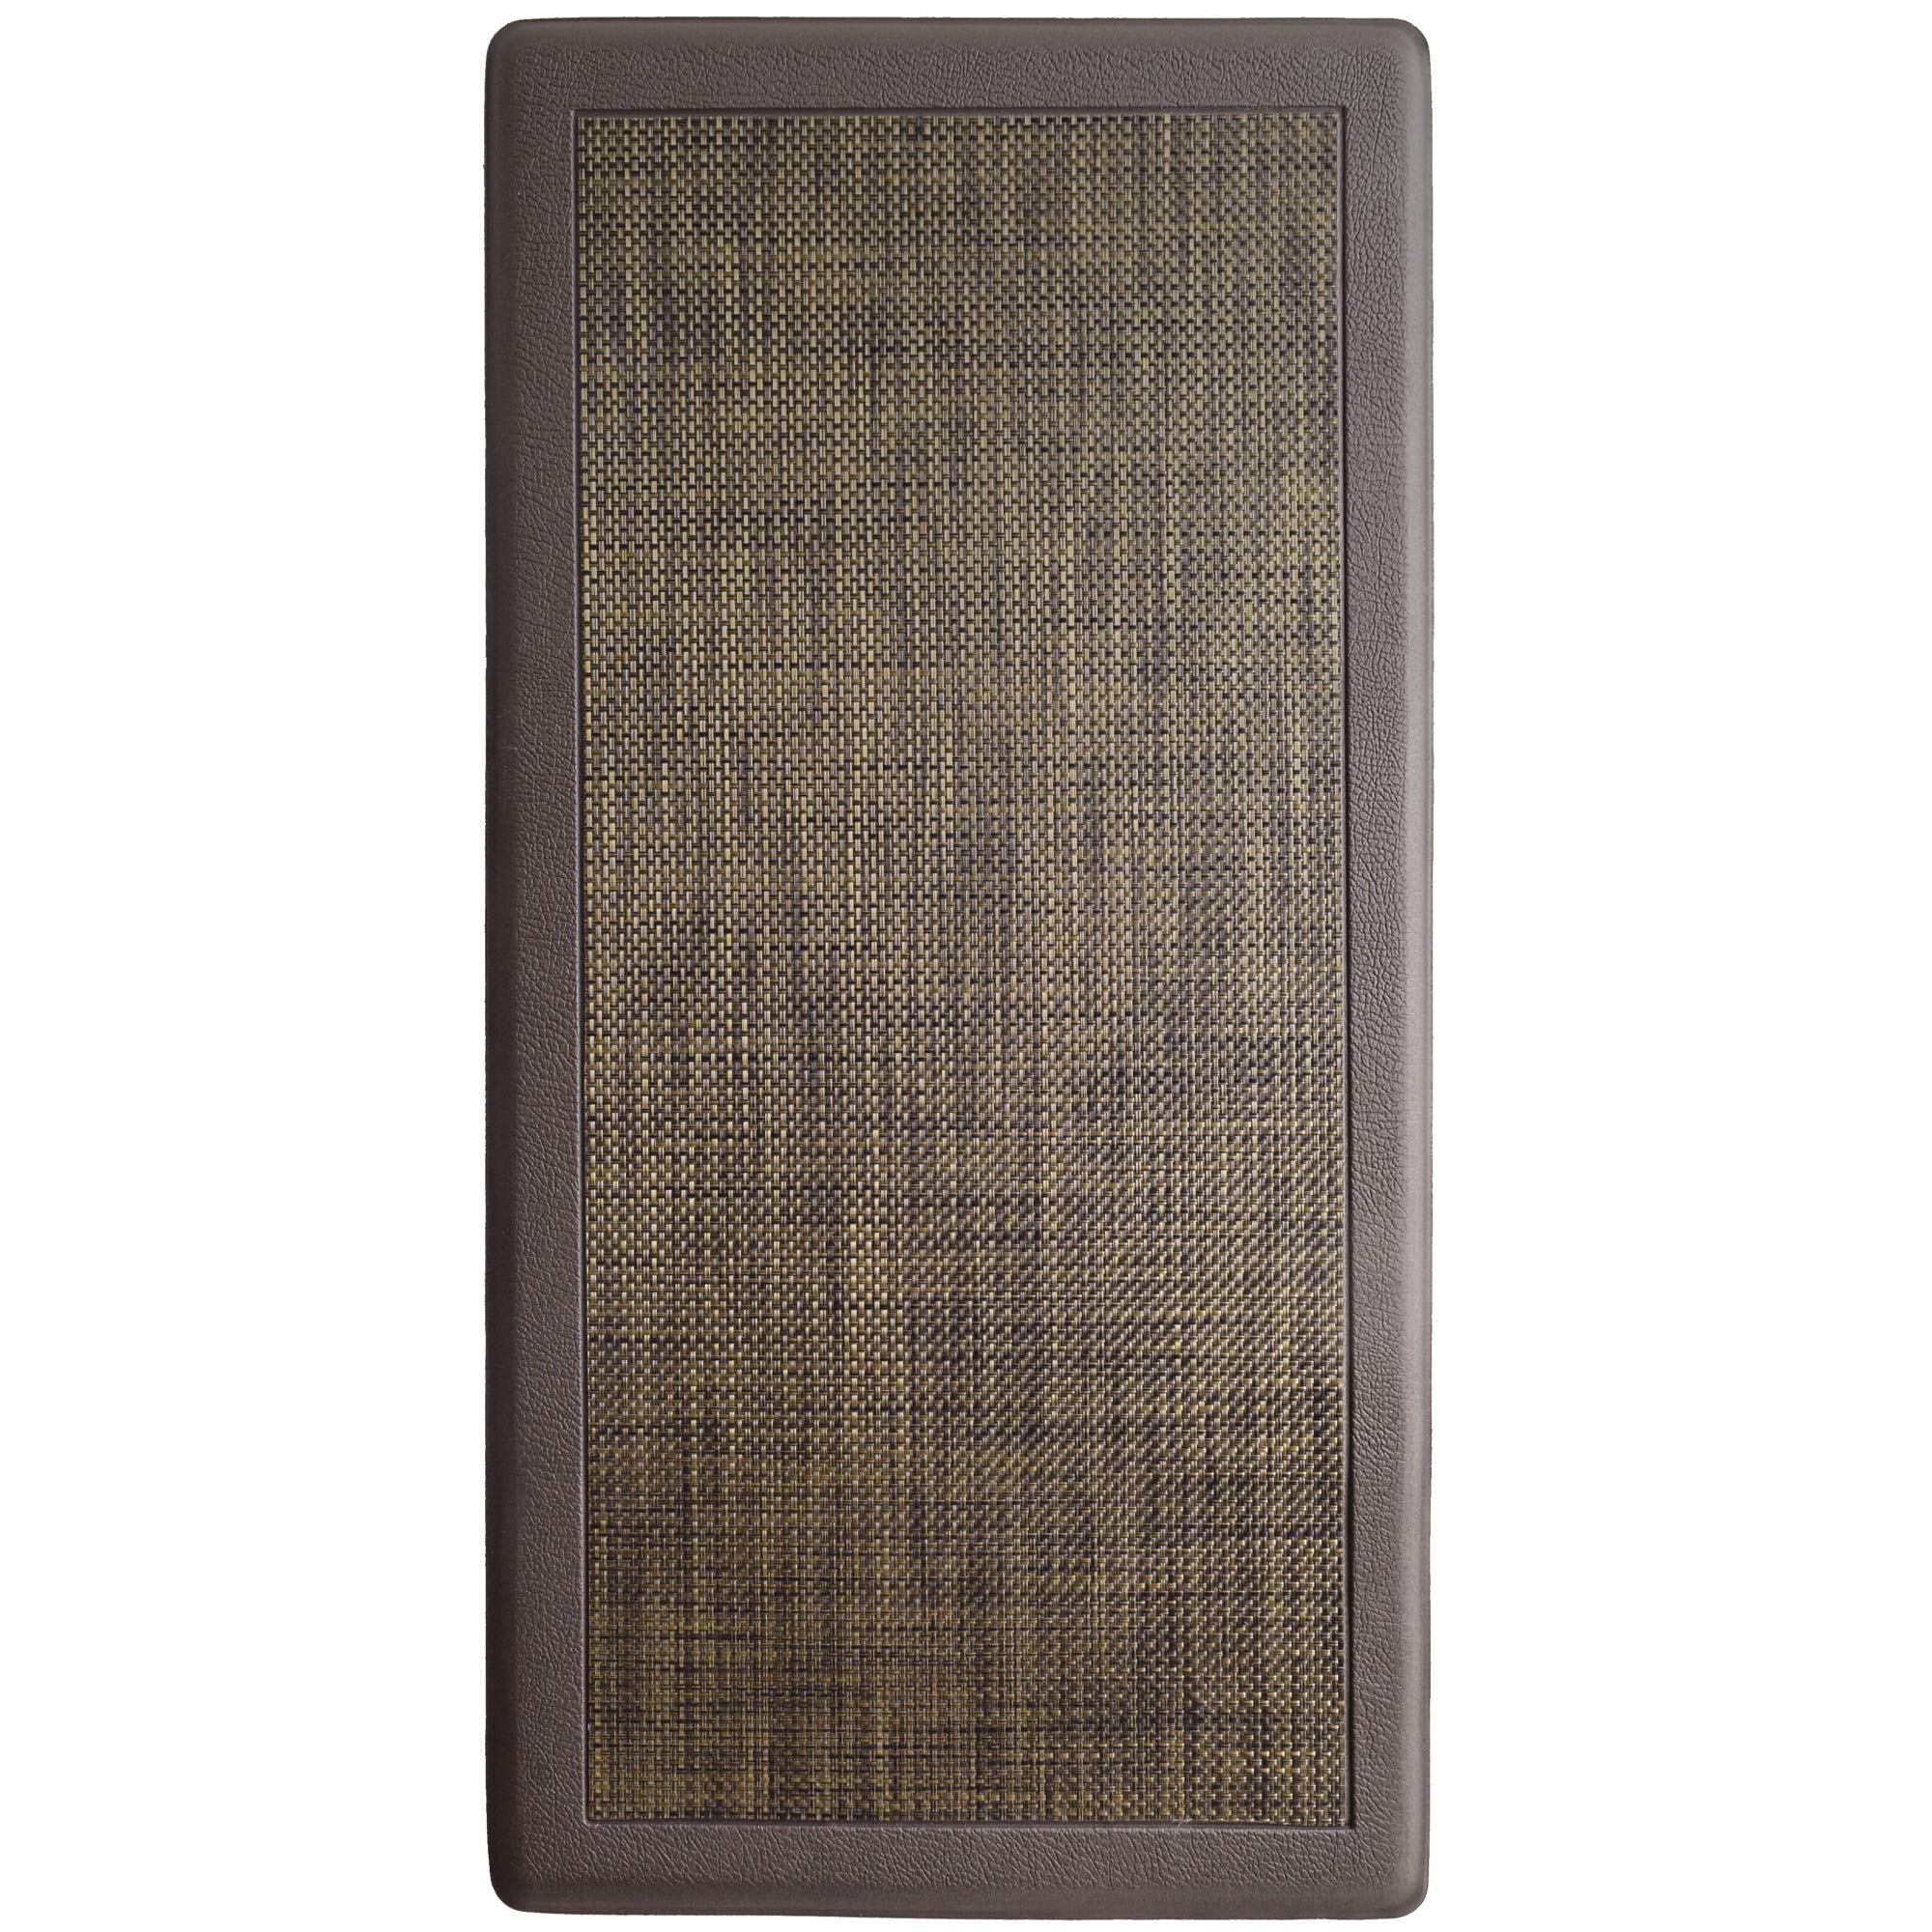 iCustomRug Ergonomic Anti Fatigue Kitchen Mat with Durable textalene Surface, for Comfort While Standing in Kitchen, Bathroom, Workstation Memory Foam Mat 39"×20"×0.50" (L×W×H) in Fawn